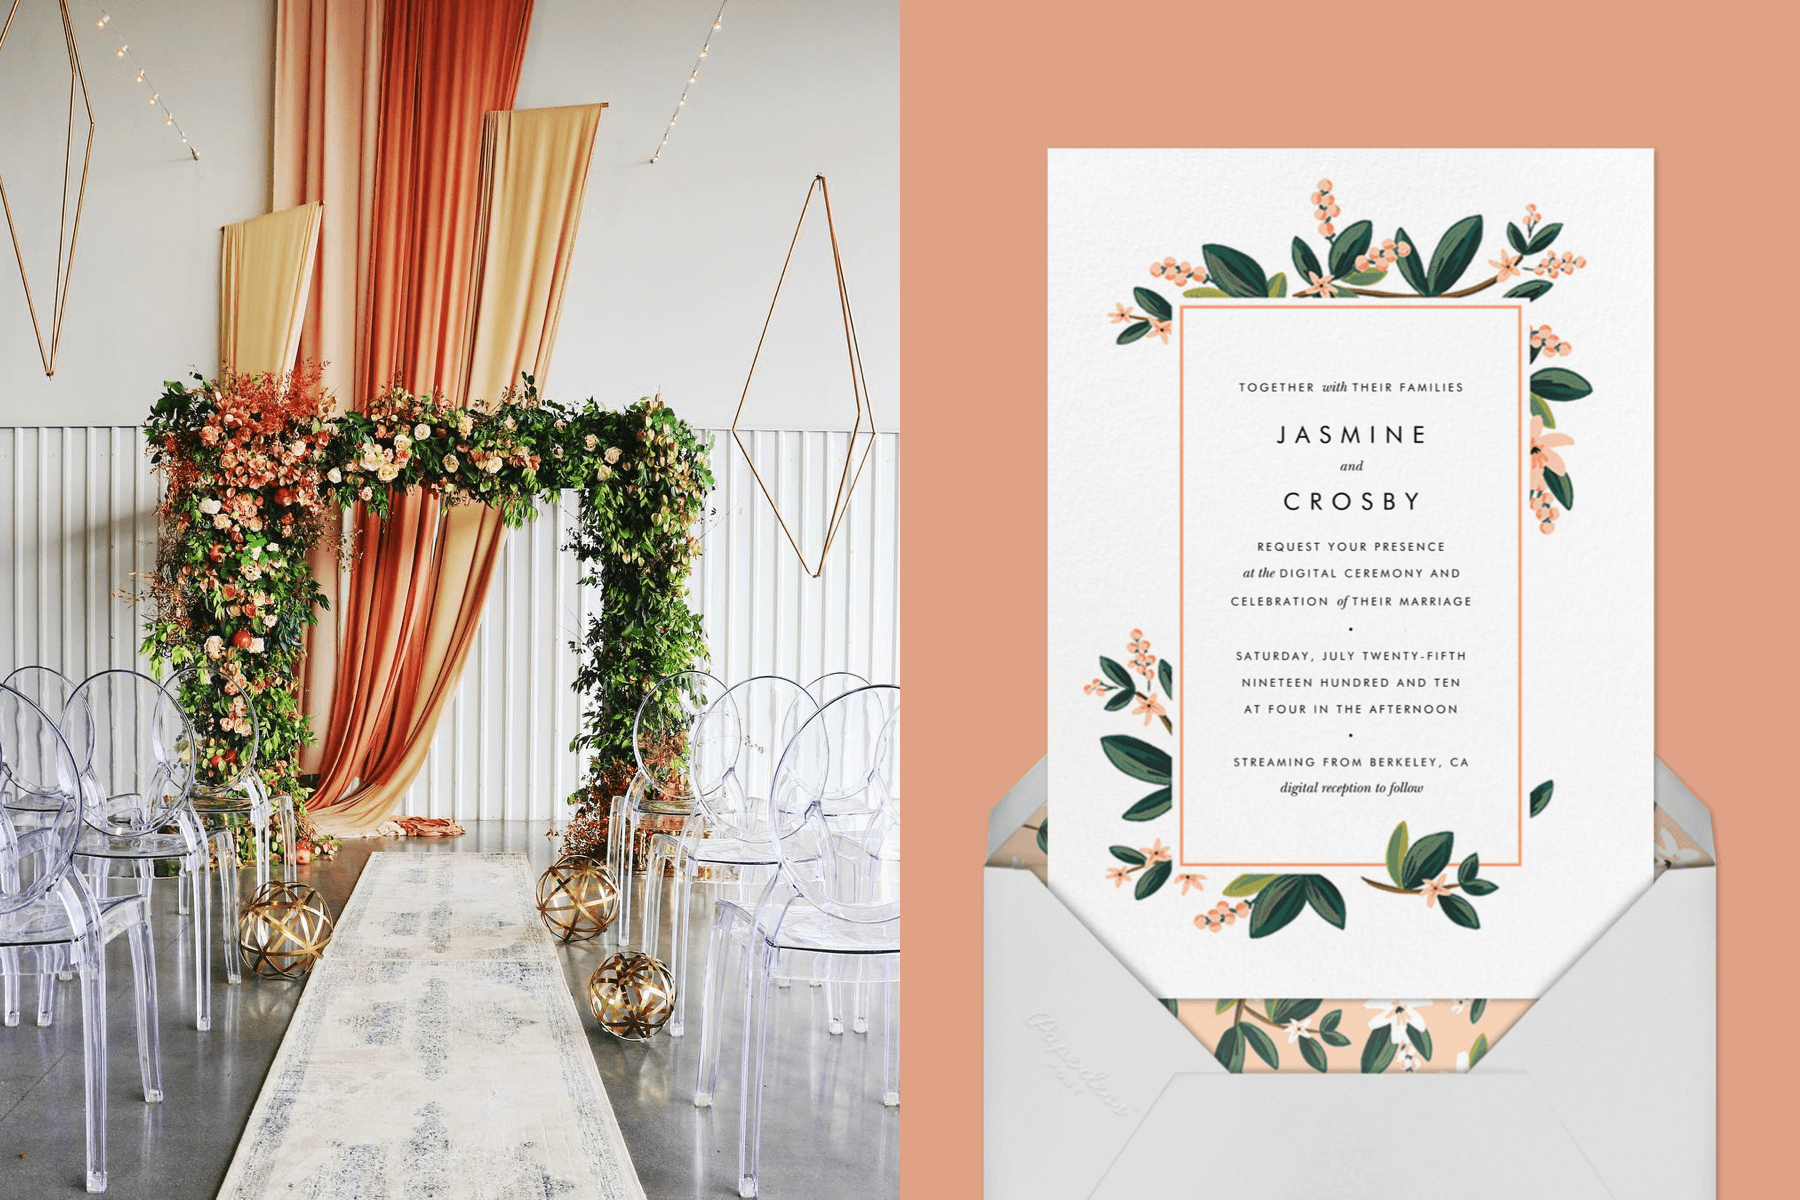 left: A wedding arbor covered in flowers and greenery with acrylic chairs on each side of the aisle. Right: A white wedding invitation with illustrated pink flowers and leaves around the border. 